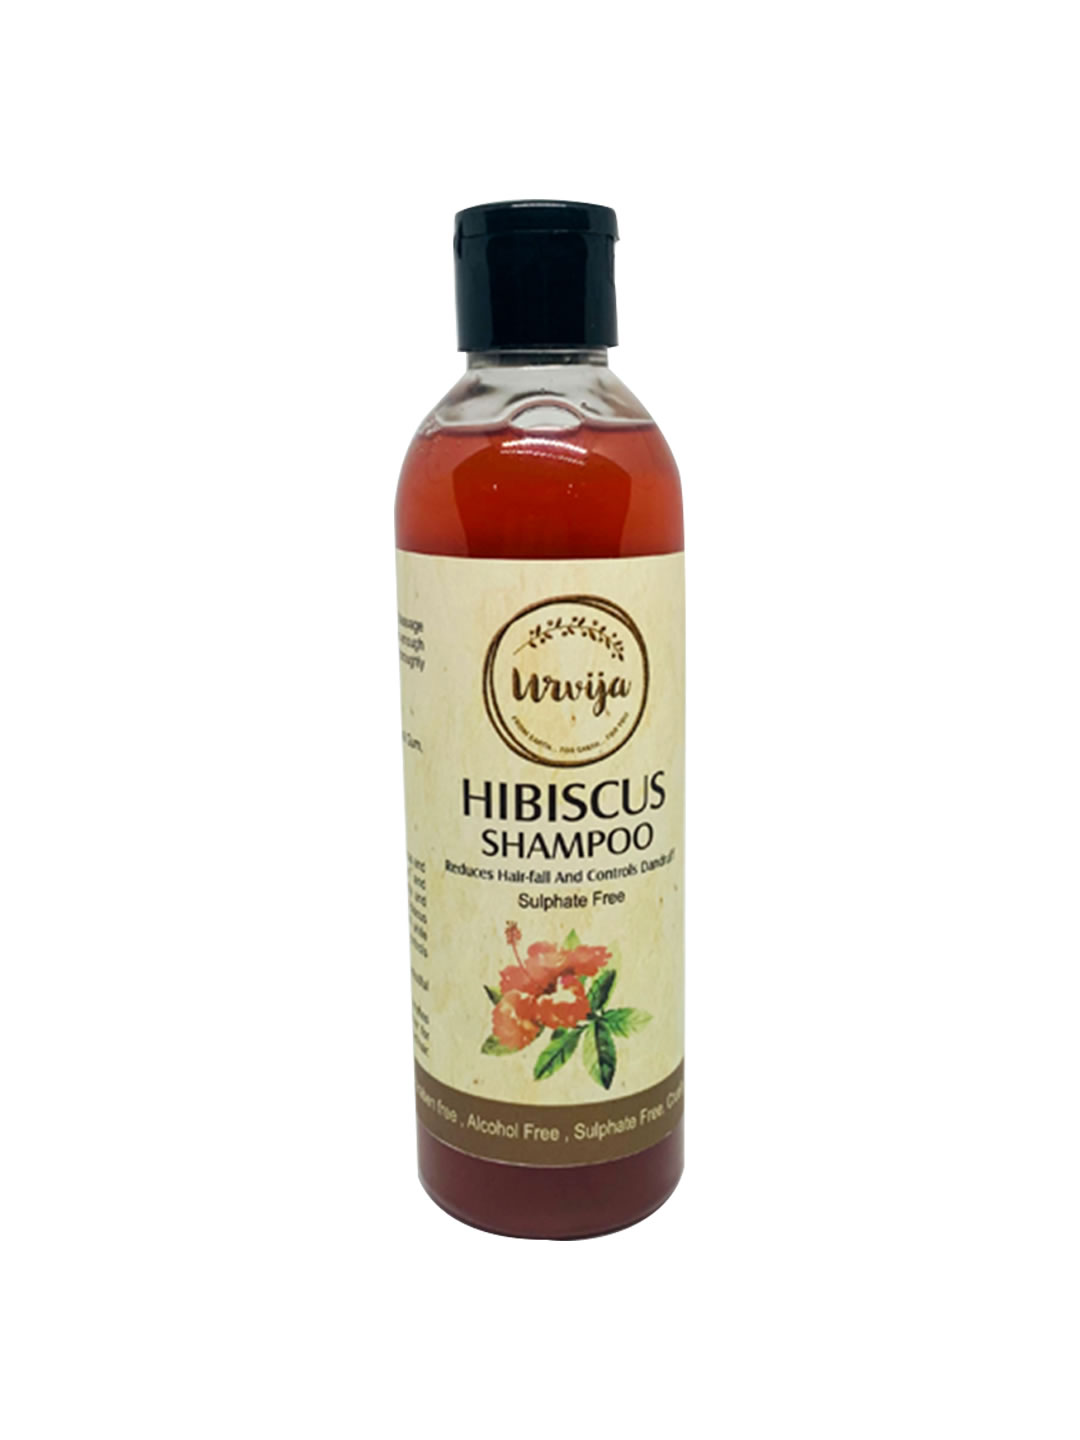 Hibiscus ShampooHealth and BeautyBeauty ParloursAll Indiaother